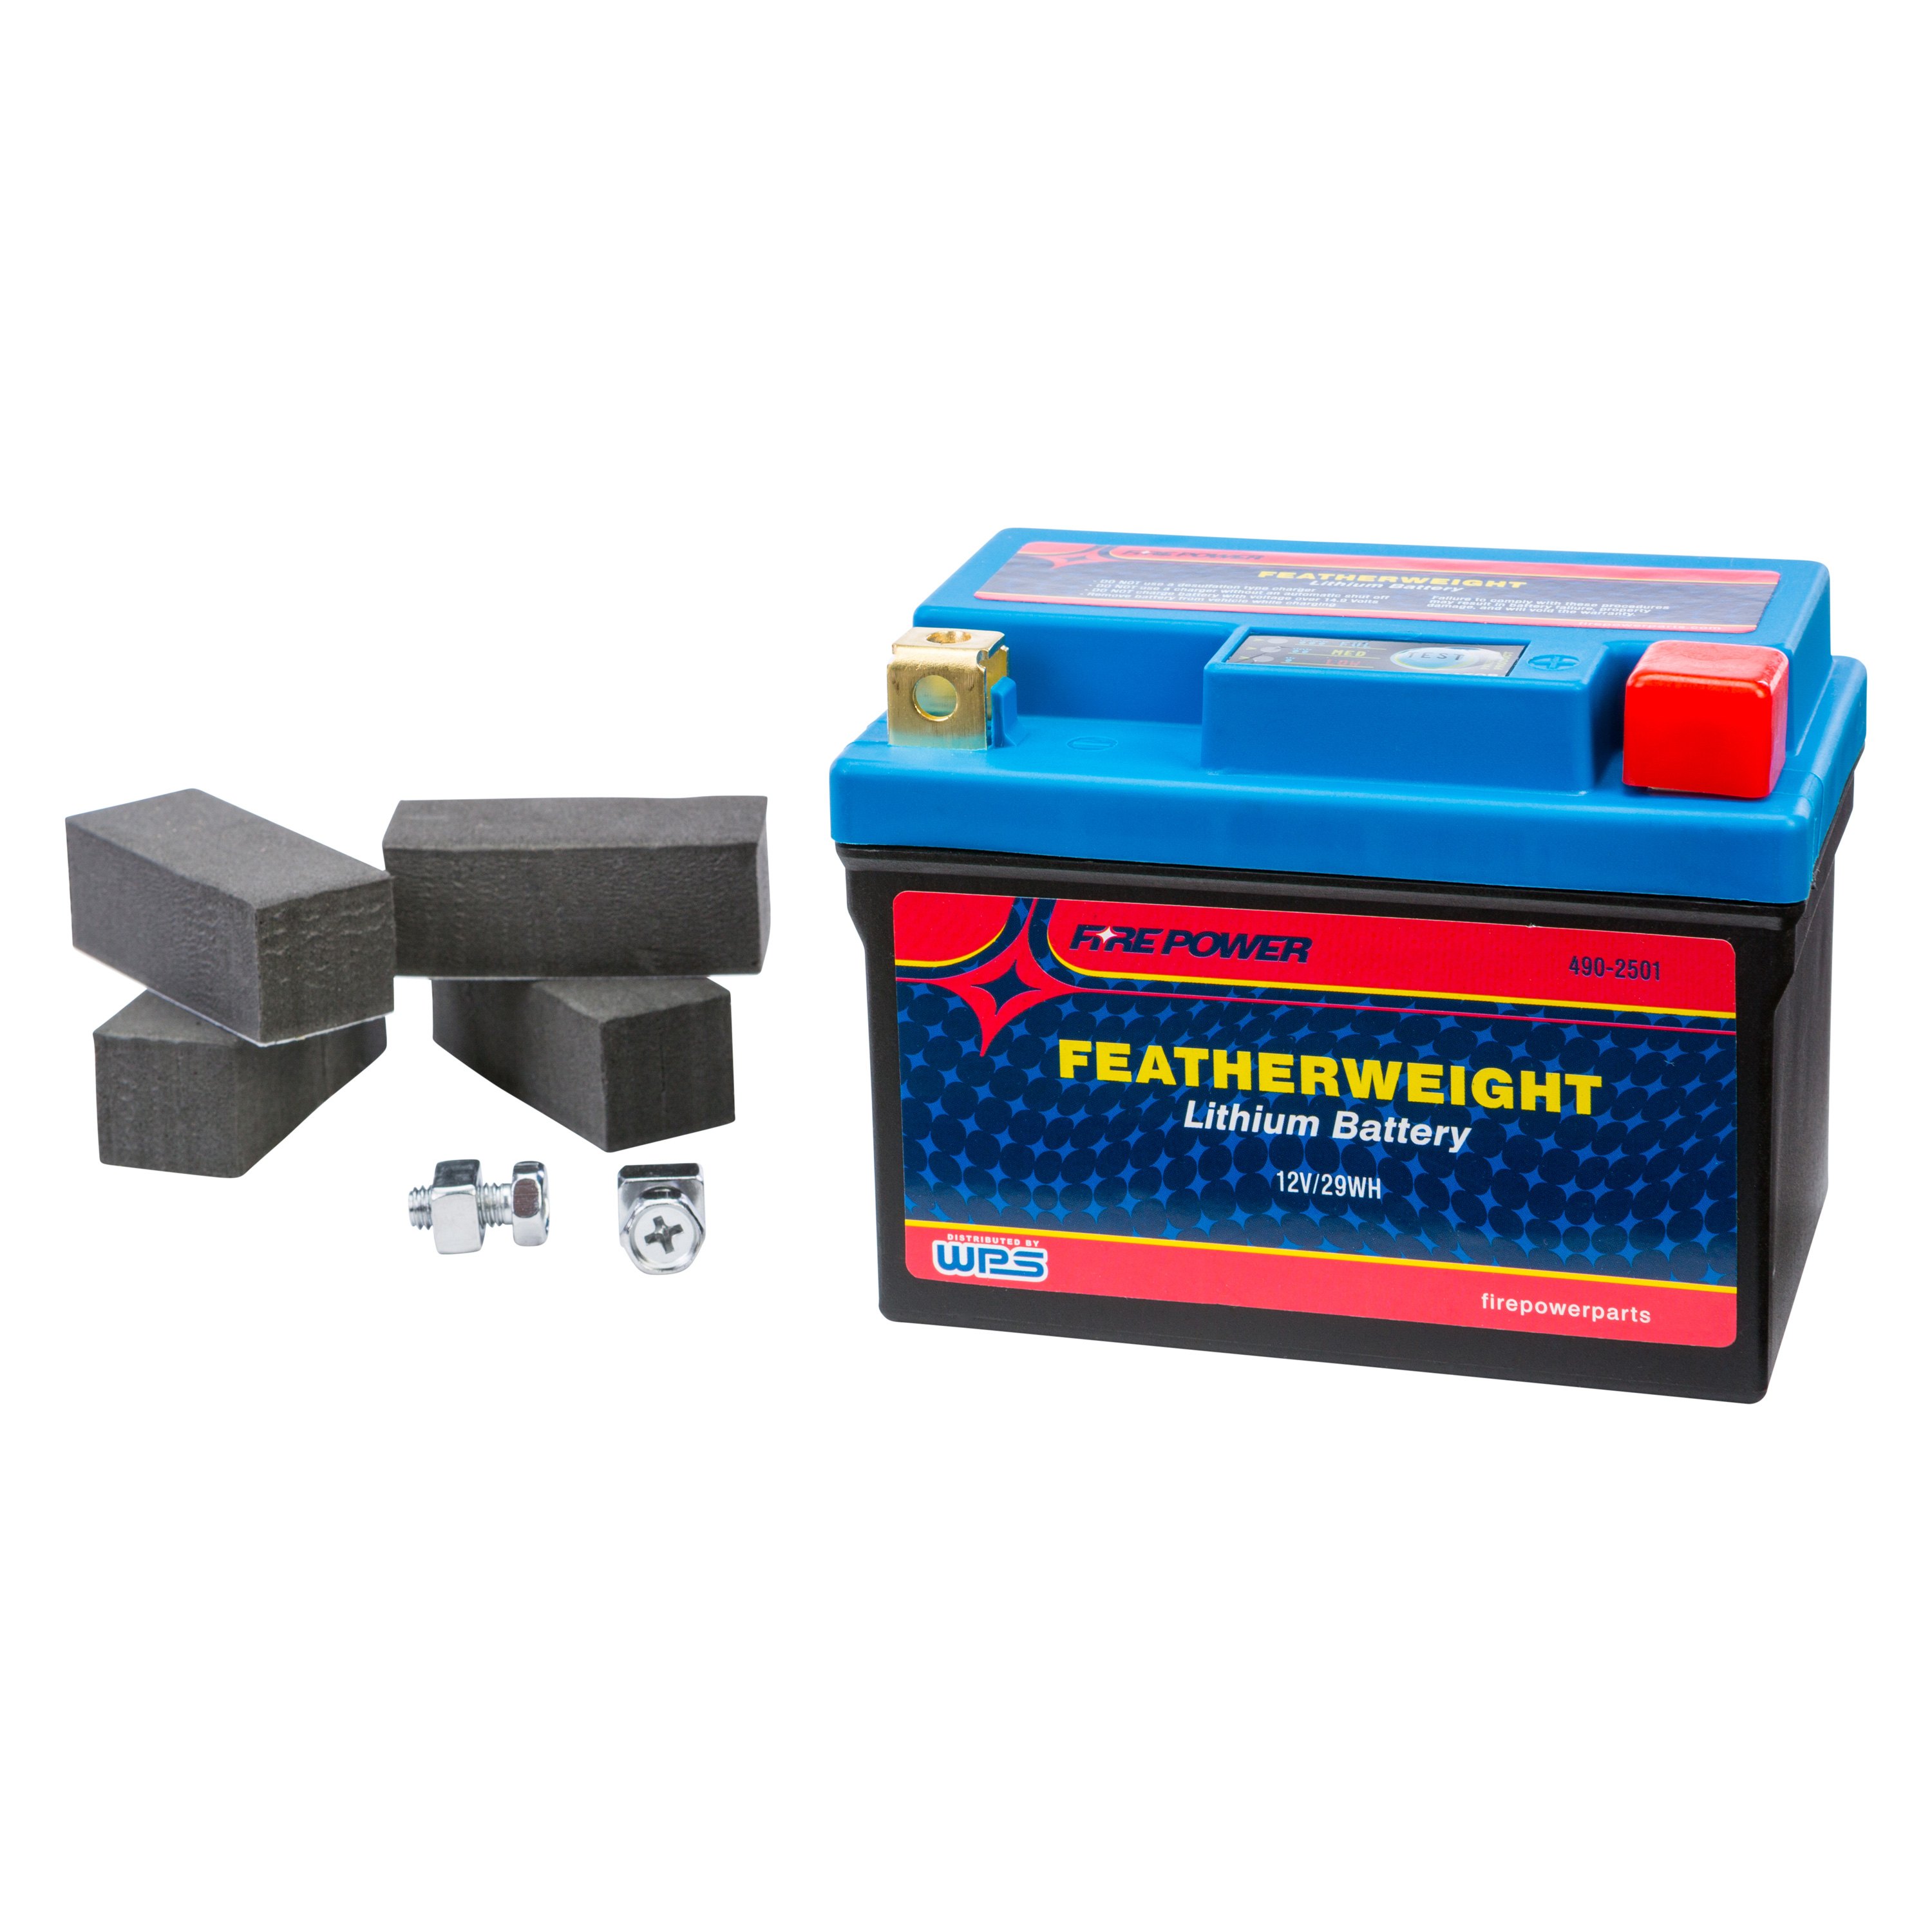 FeatherWeight Lithium Battery Fire Power HJTZ5S-FP-IL Motorcycle Applications